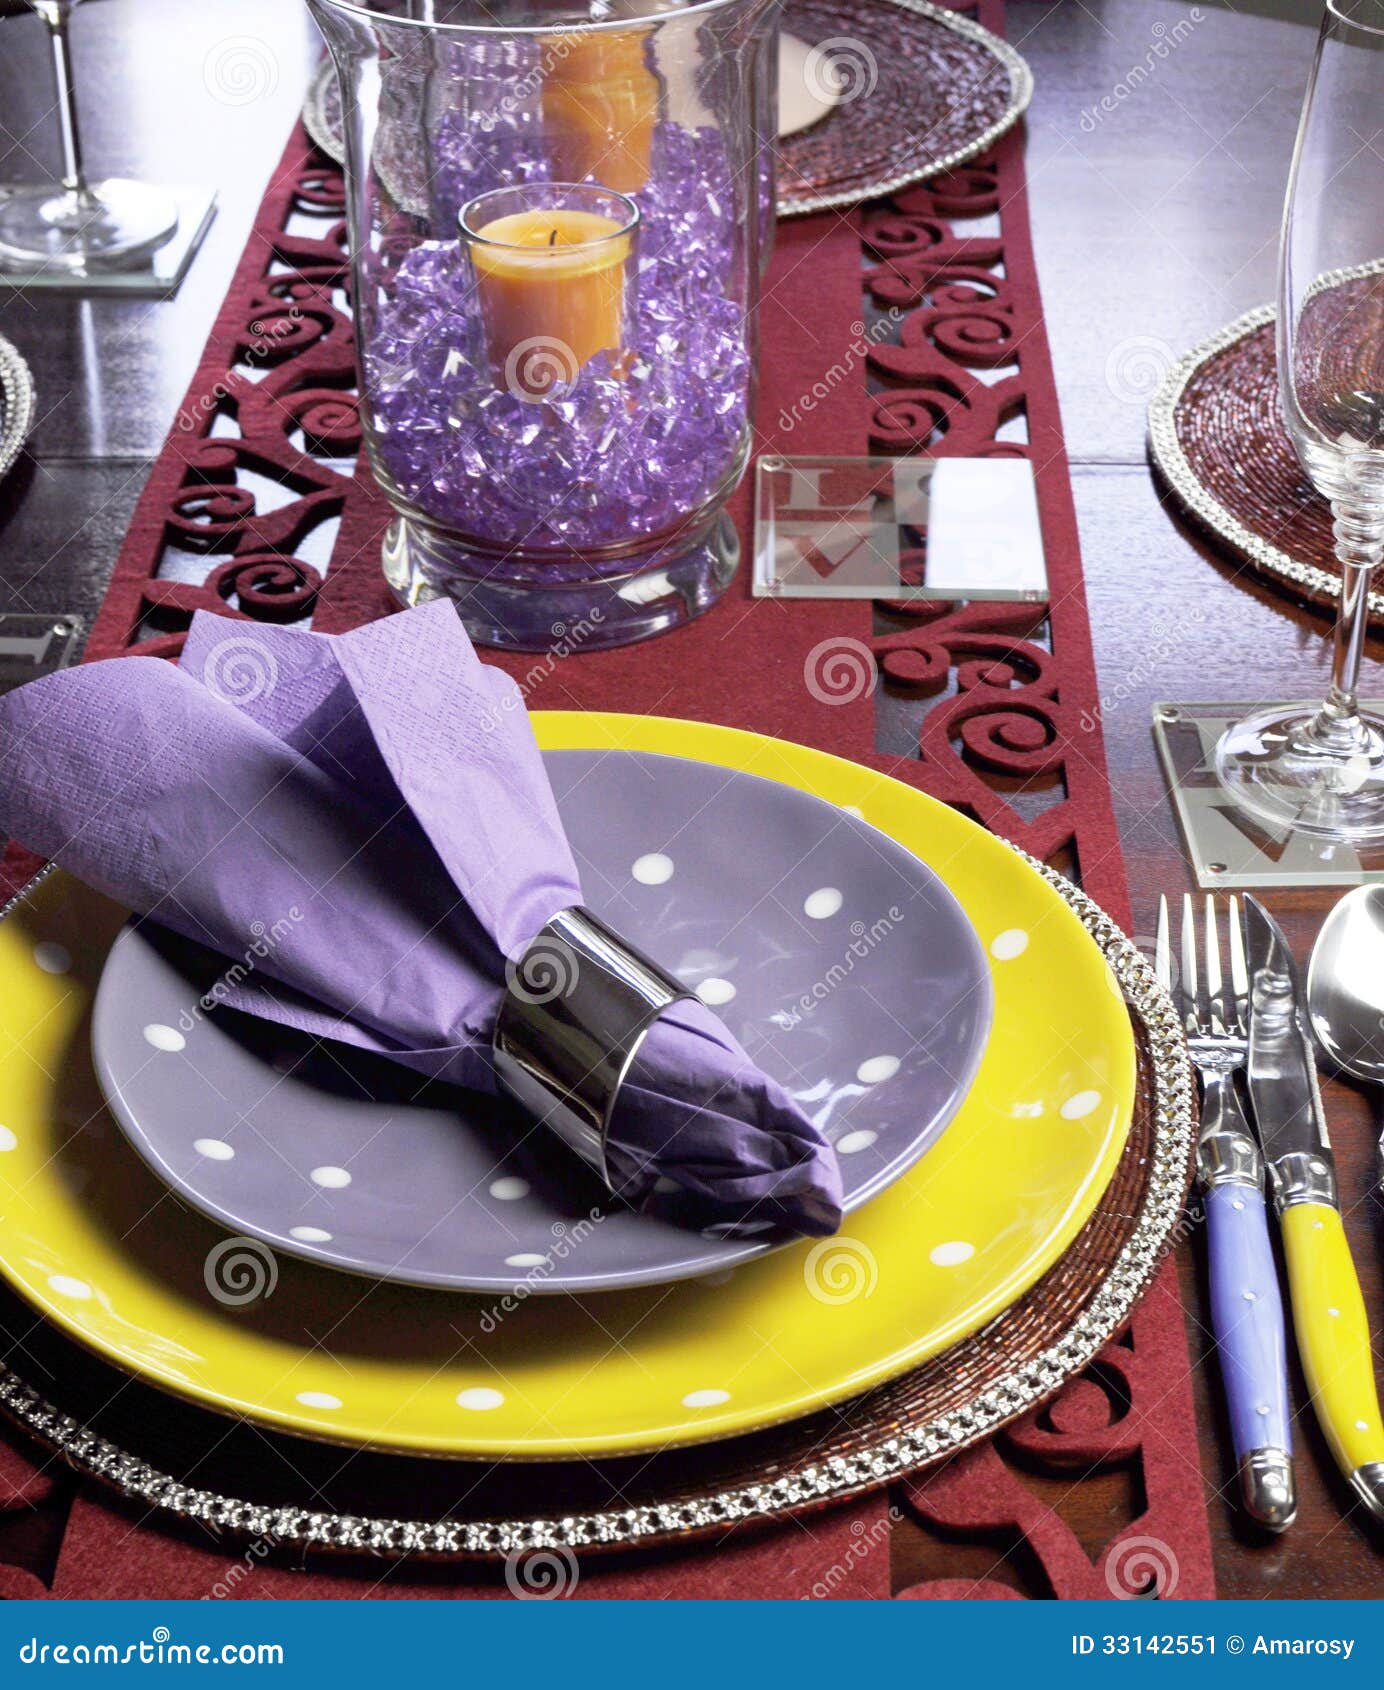 Yellow And Purple Table Place Setting - Vertical. Stock ...